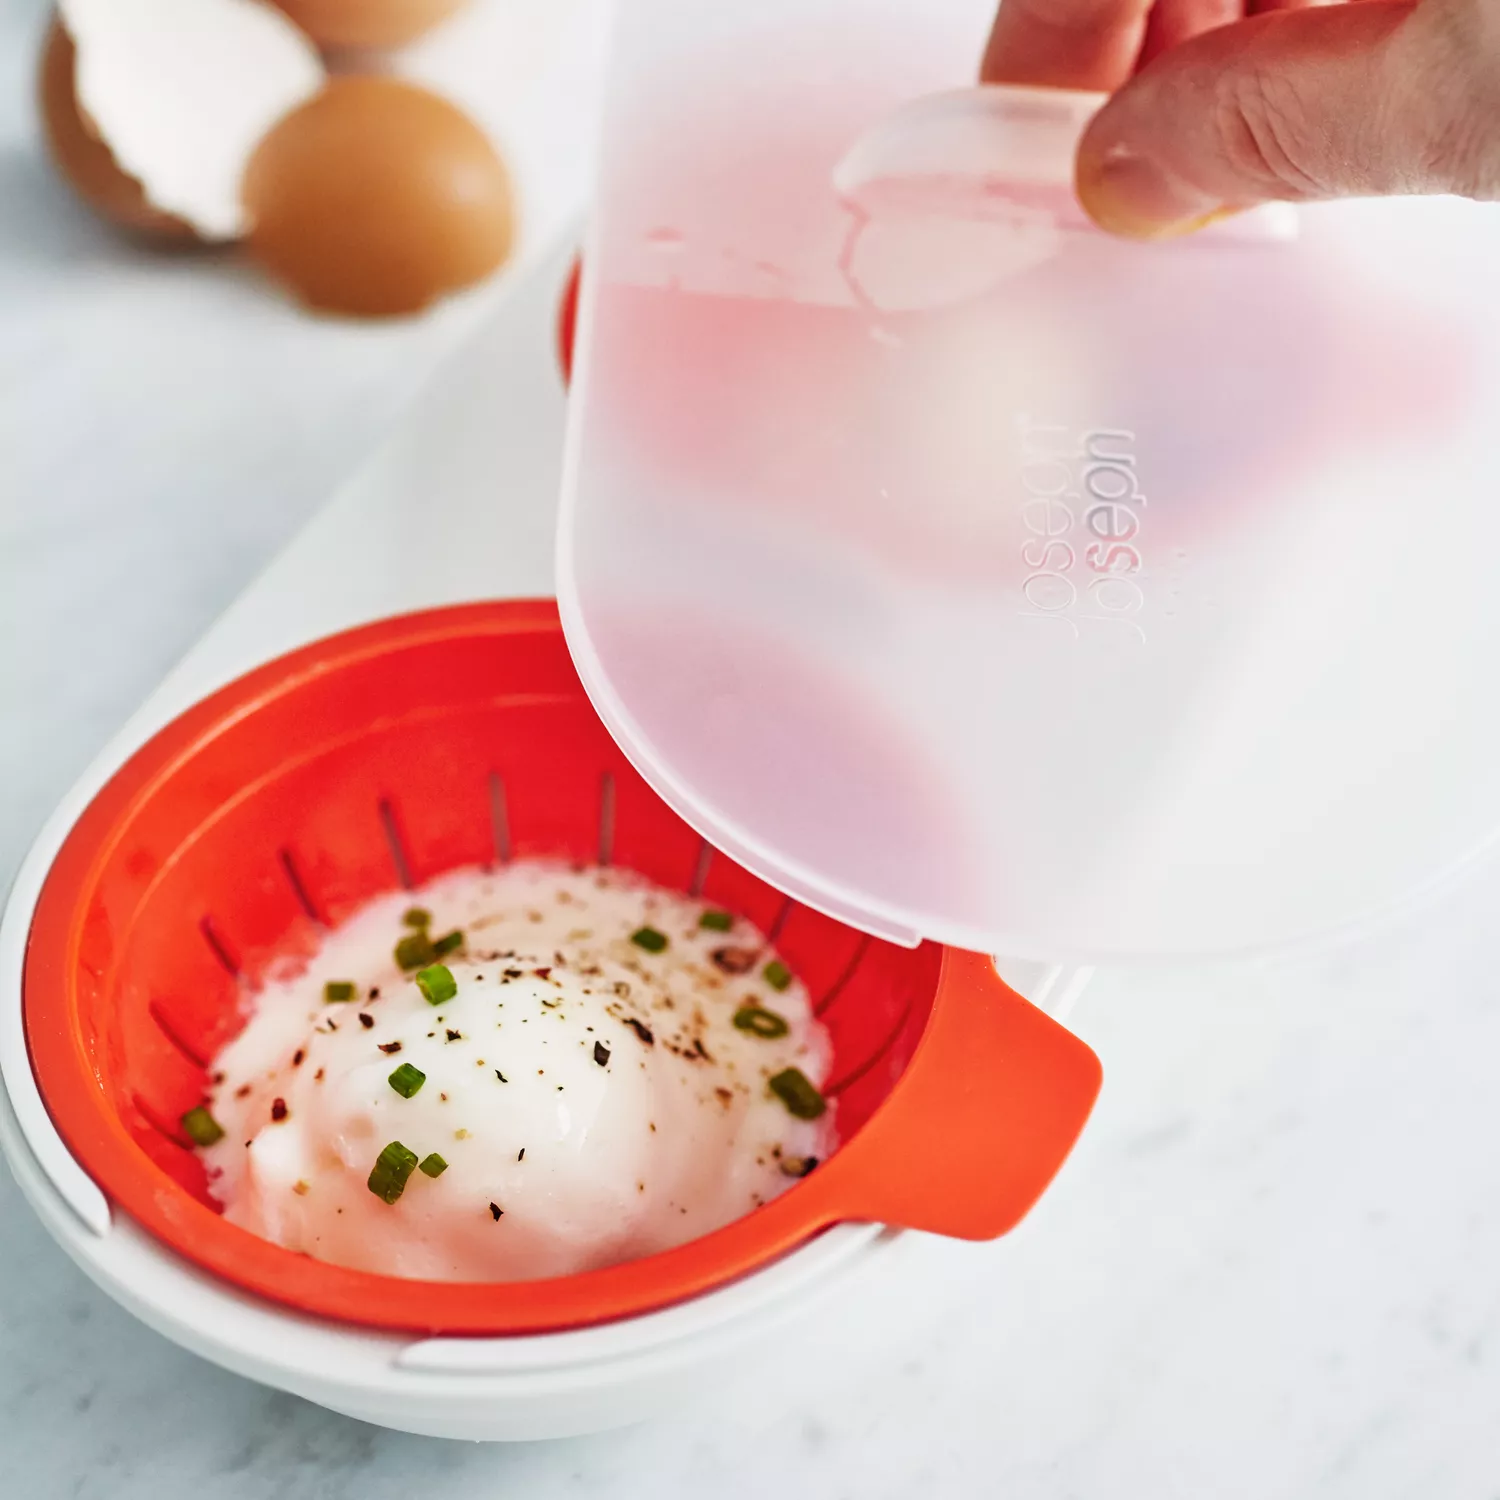 Home-X - Microwave Egg Poacher, Easy-To-Use Dishwasher-Safe Poached Egg  Maker for Fast, Low-Calorie Breakfasts, Lunches and Dinner, Cooks Two Eggs  at